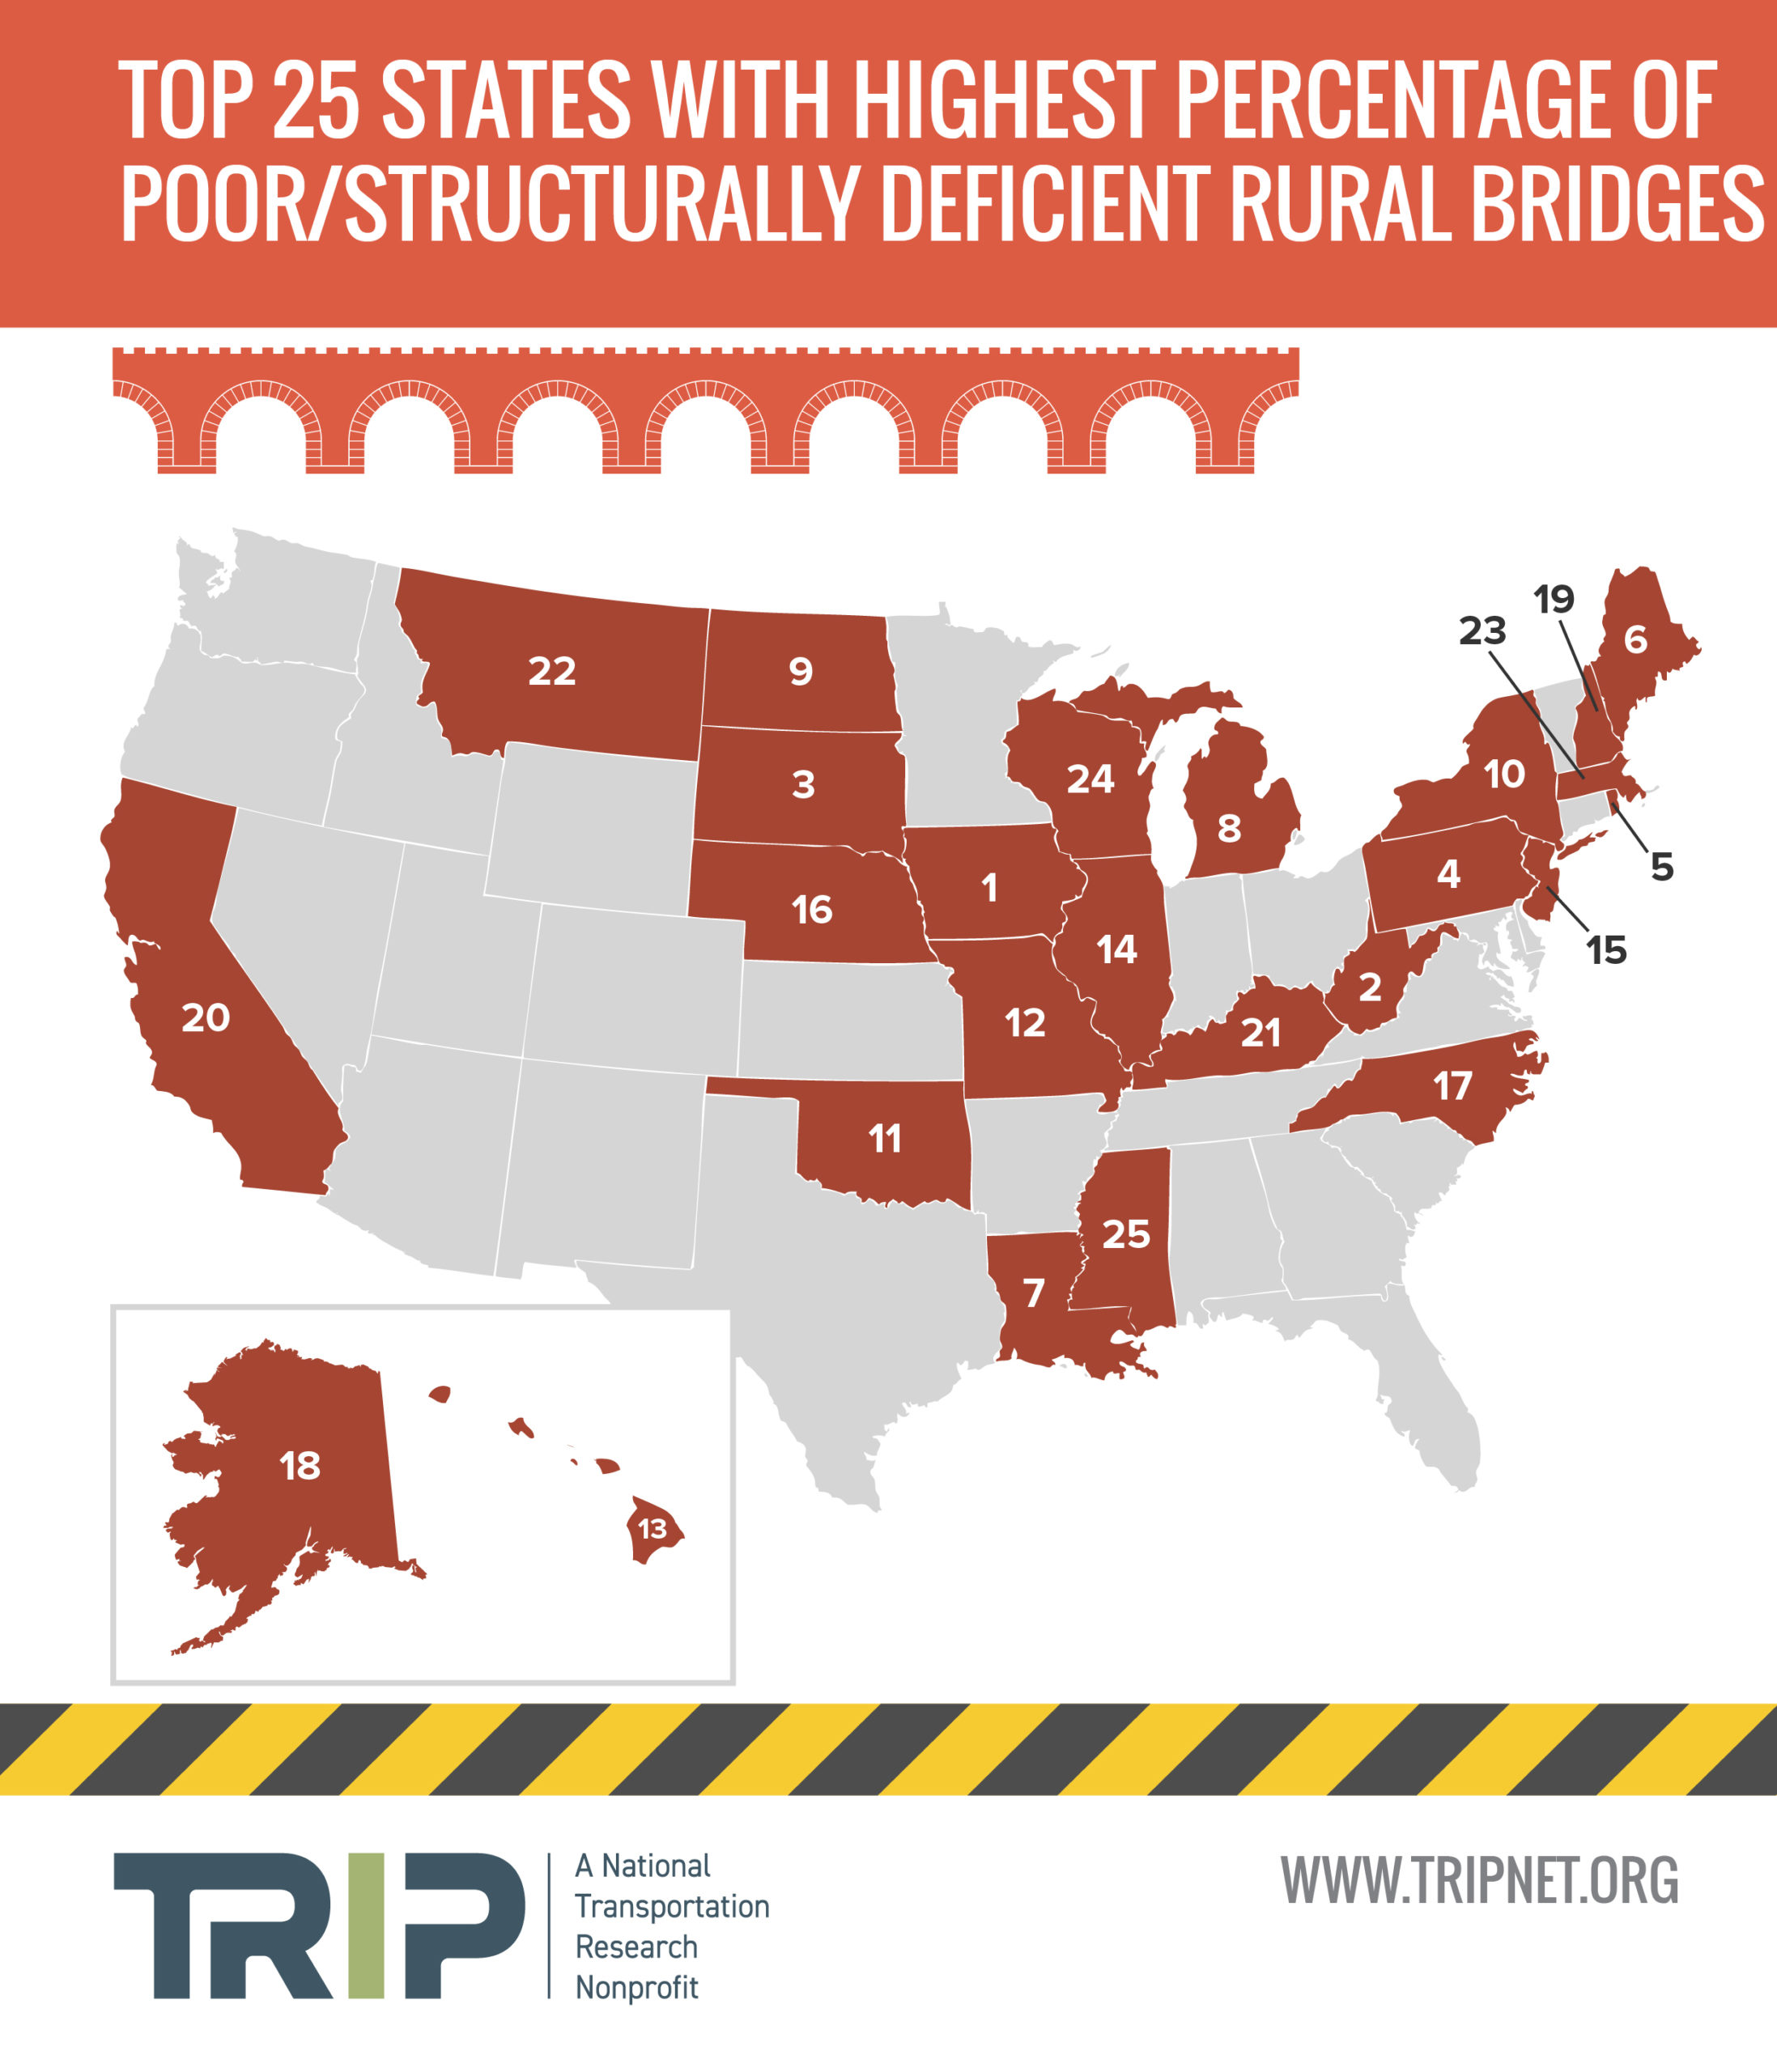 Top 25 States with Highest Percentage of Poor/Structurally Deficient Rural Bridges Infographic – October 2022